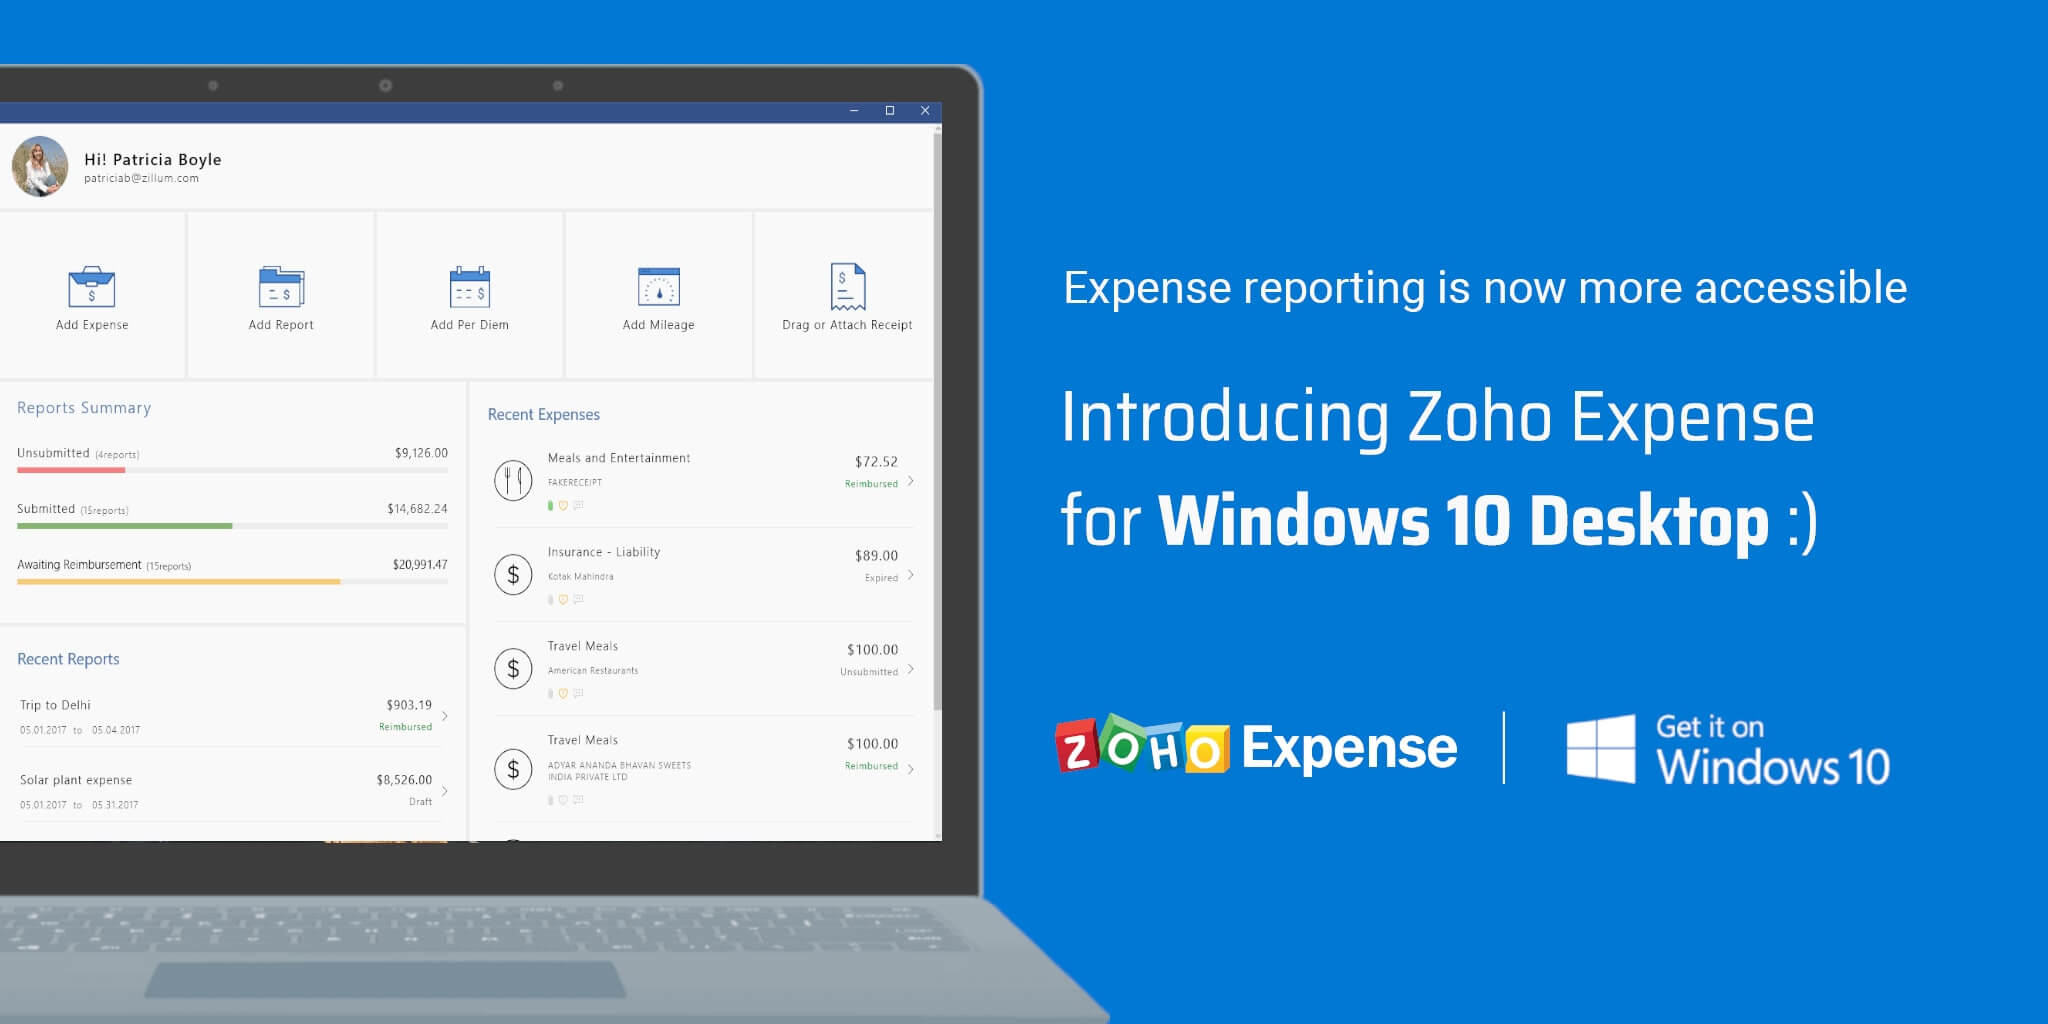 Introducing Zoho Expense for Windows 10 Desktop: Expense reporting is now more accessible